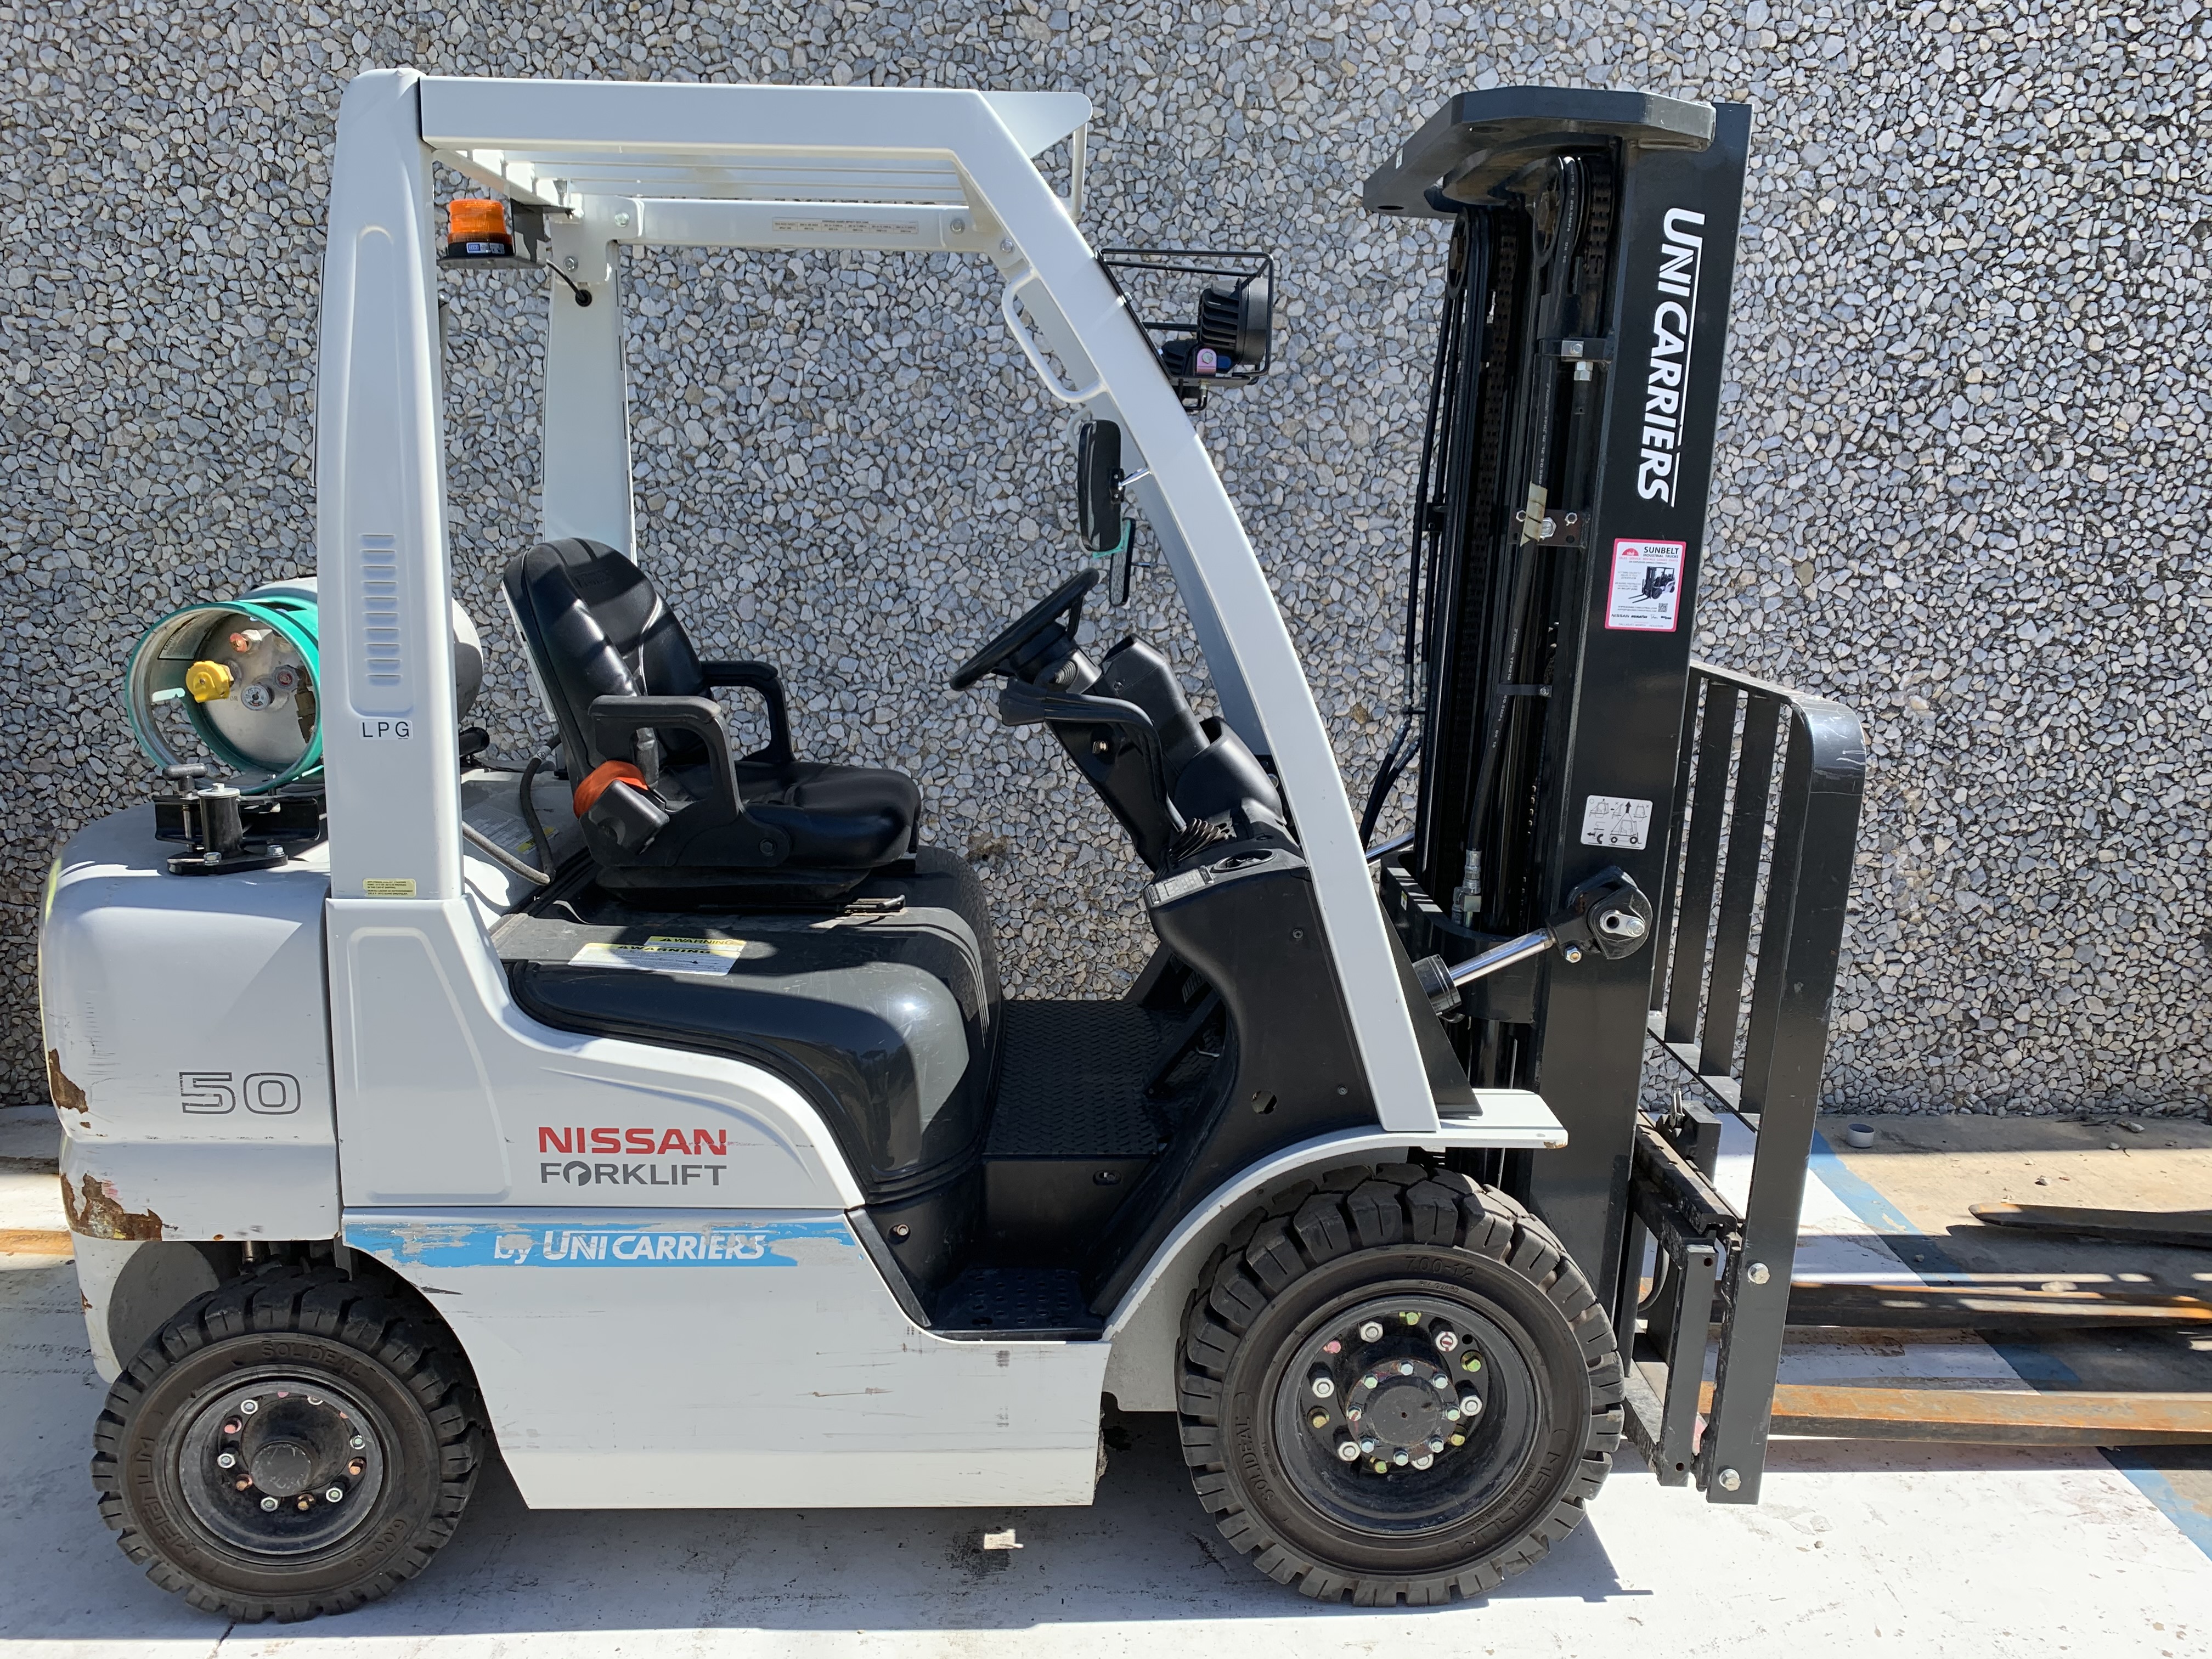 Used 10 000 Diesel Forklift In Dallas Fort Worth Waco And Albuquerque